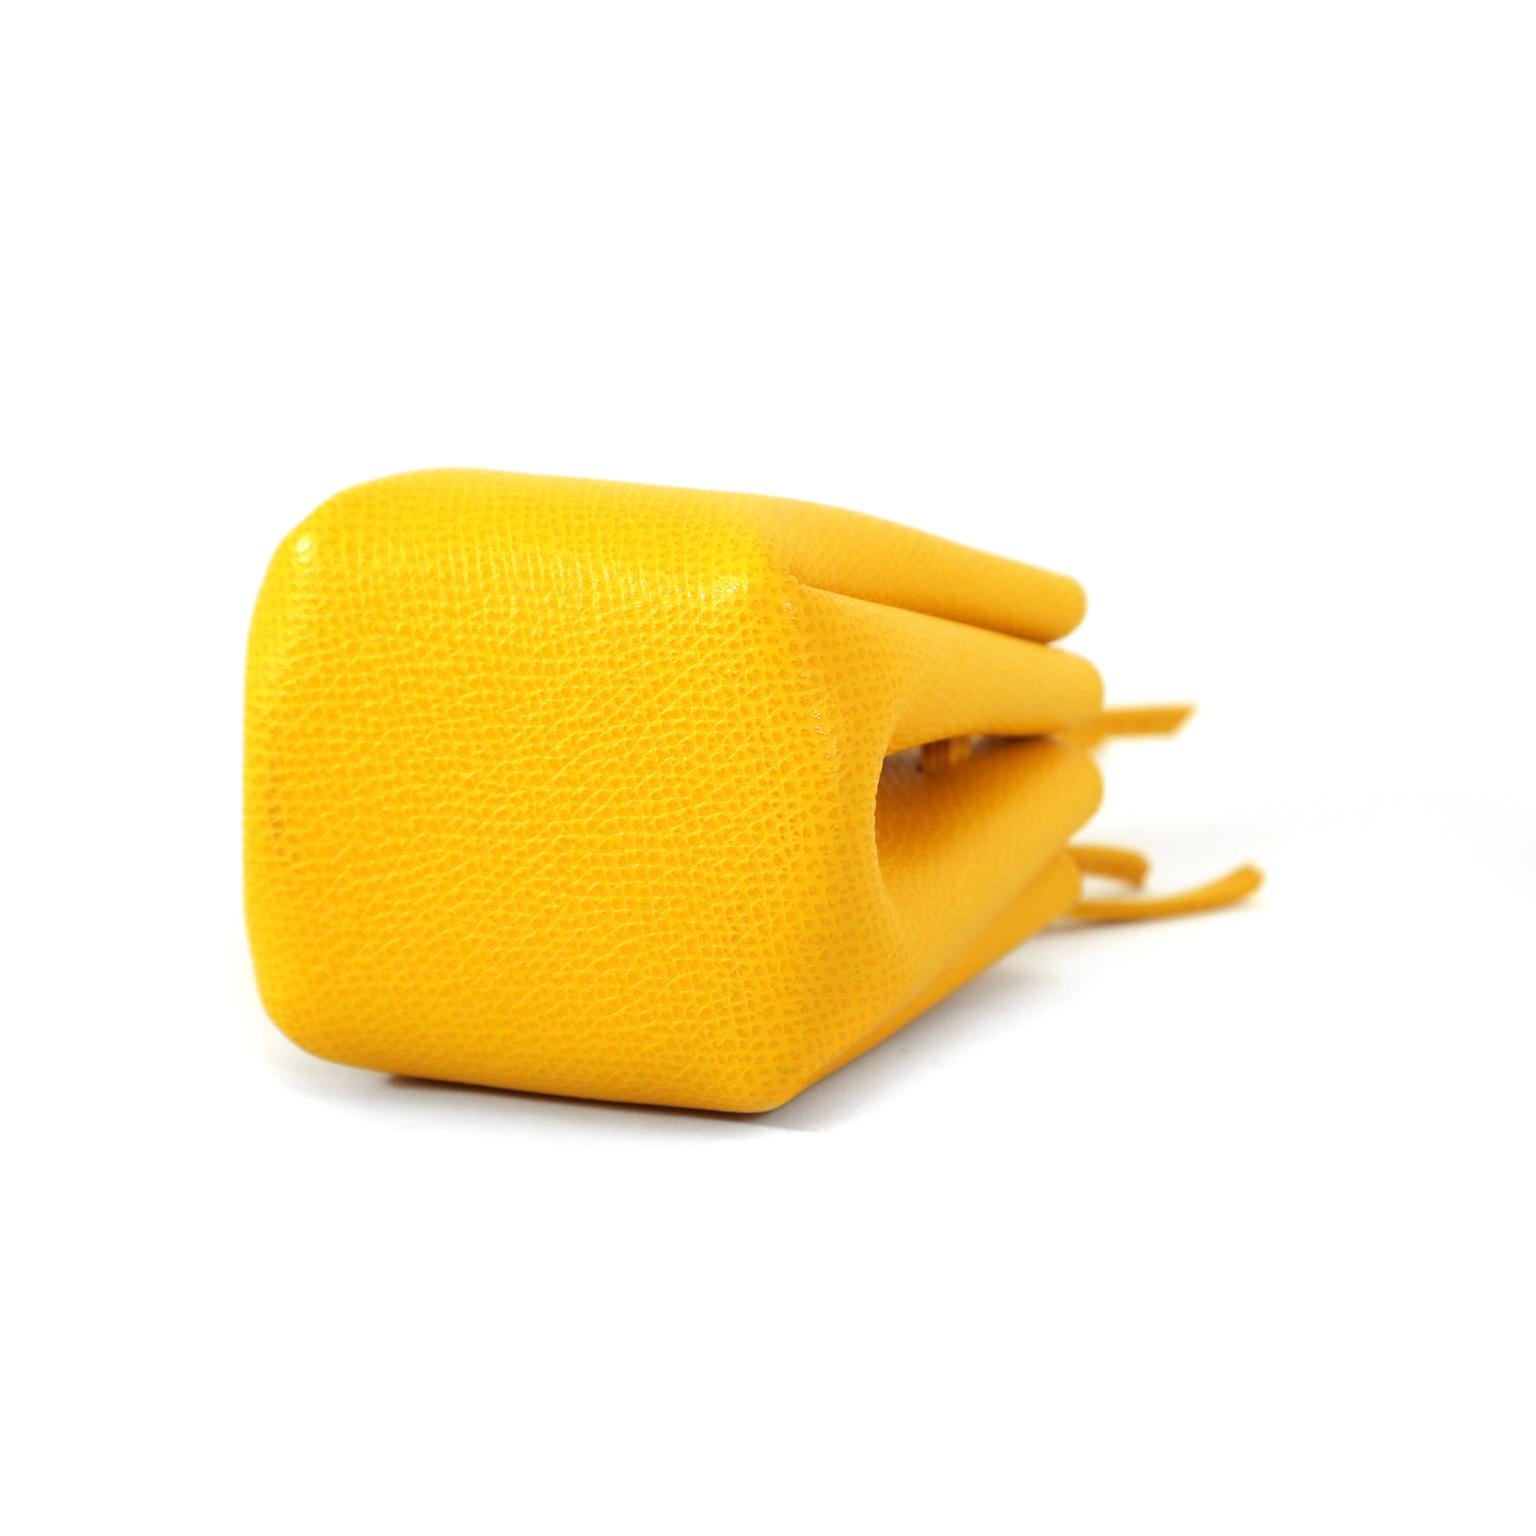 Hermès Yellow Epsom Vespa Pouch In Excellent Condition For Sale In Palm Beach, FL